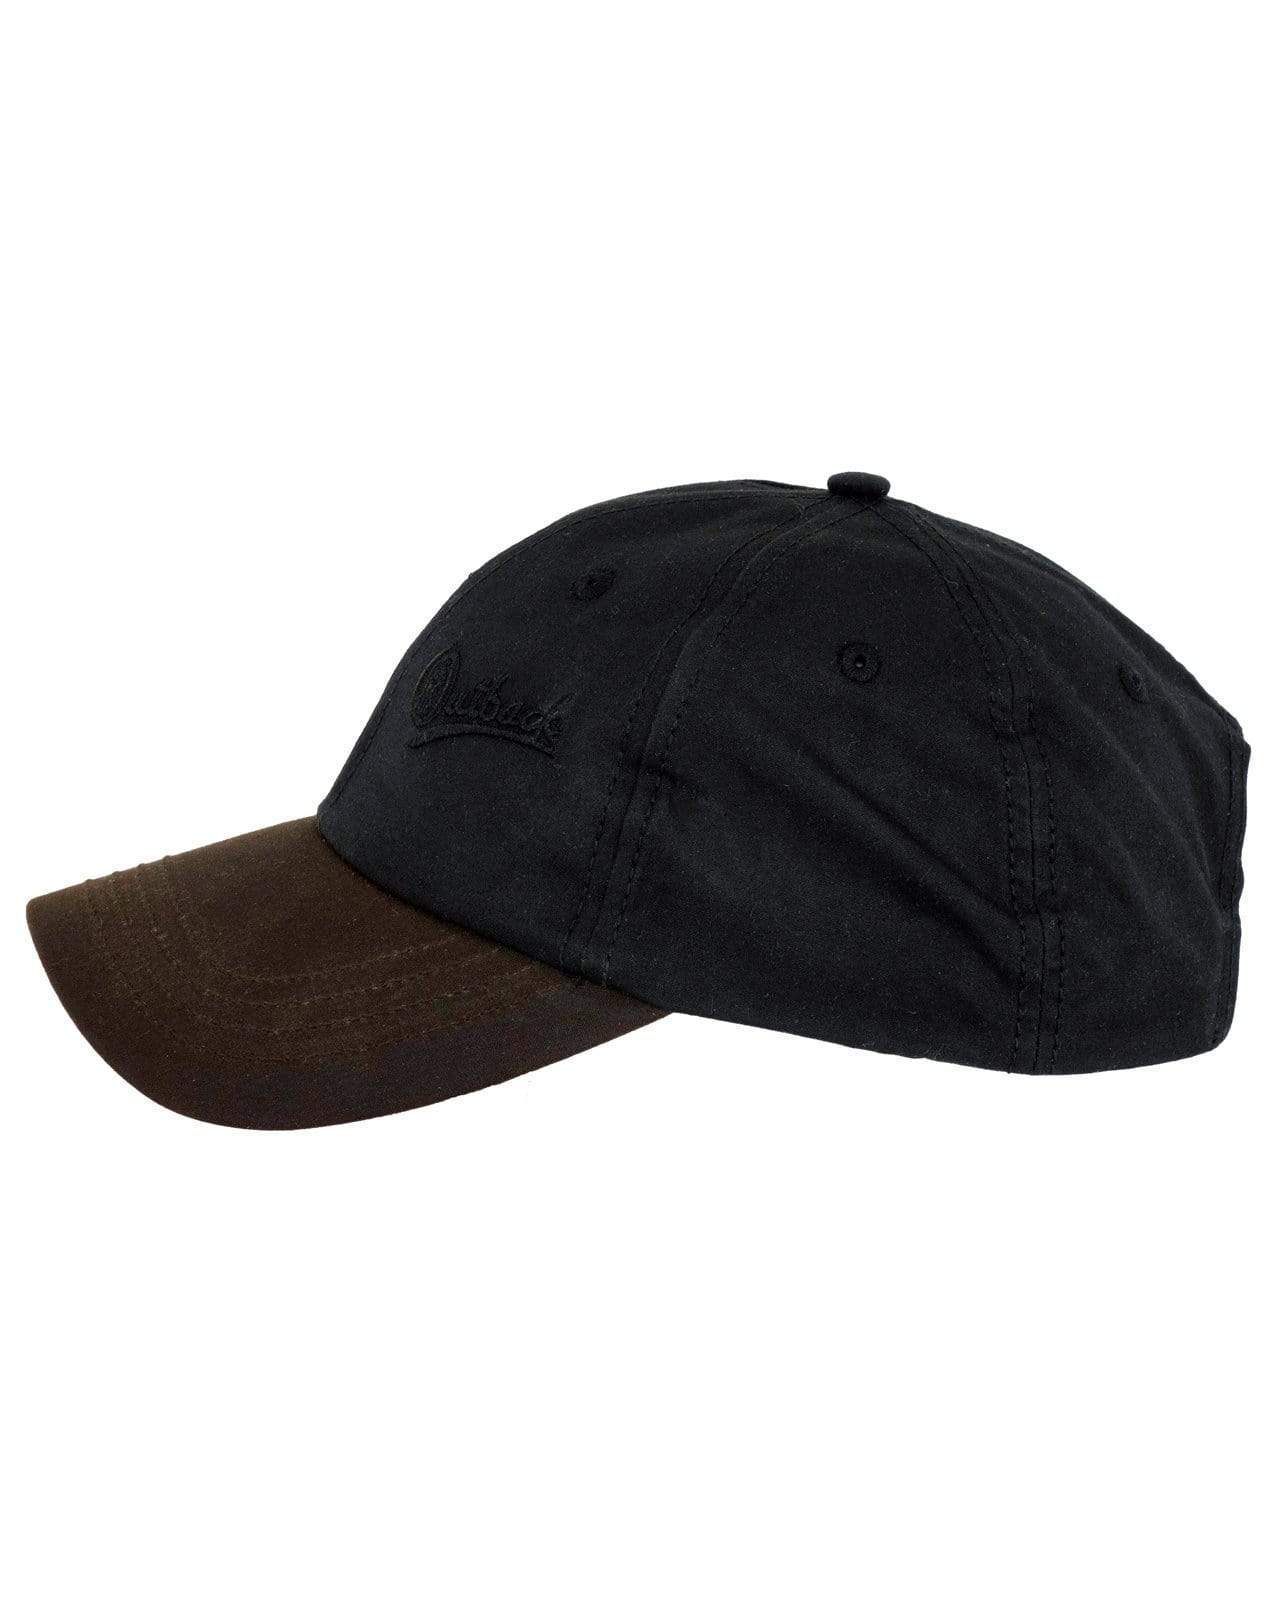 Outback Trading Company Aussie Slugger Cap Hats